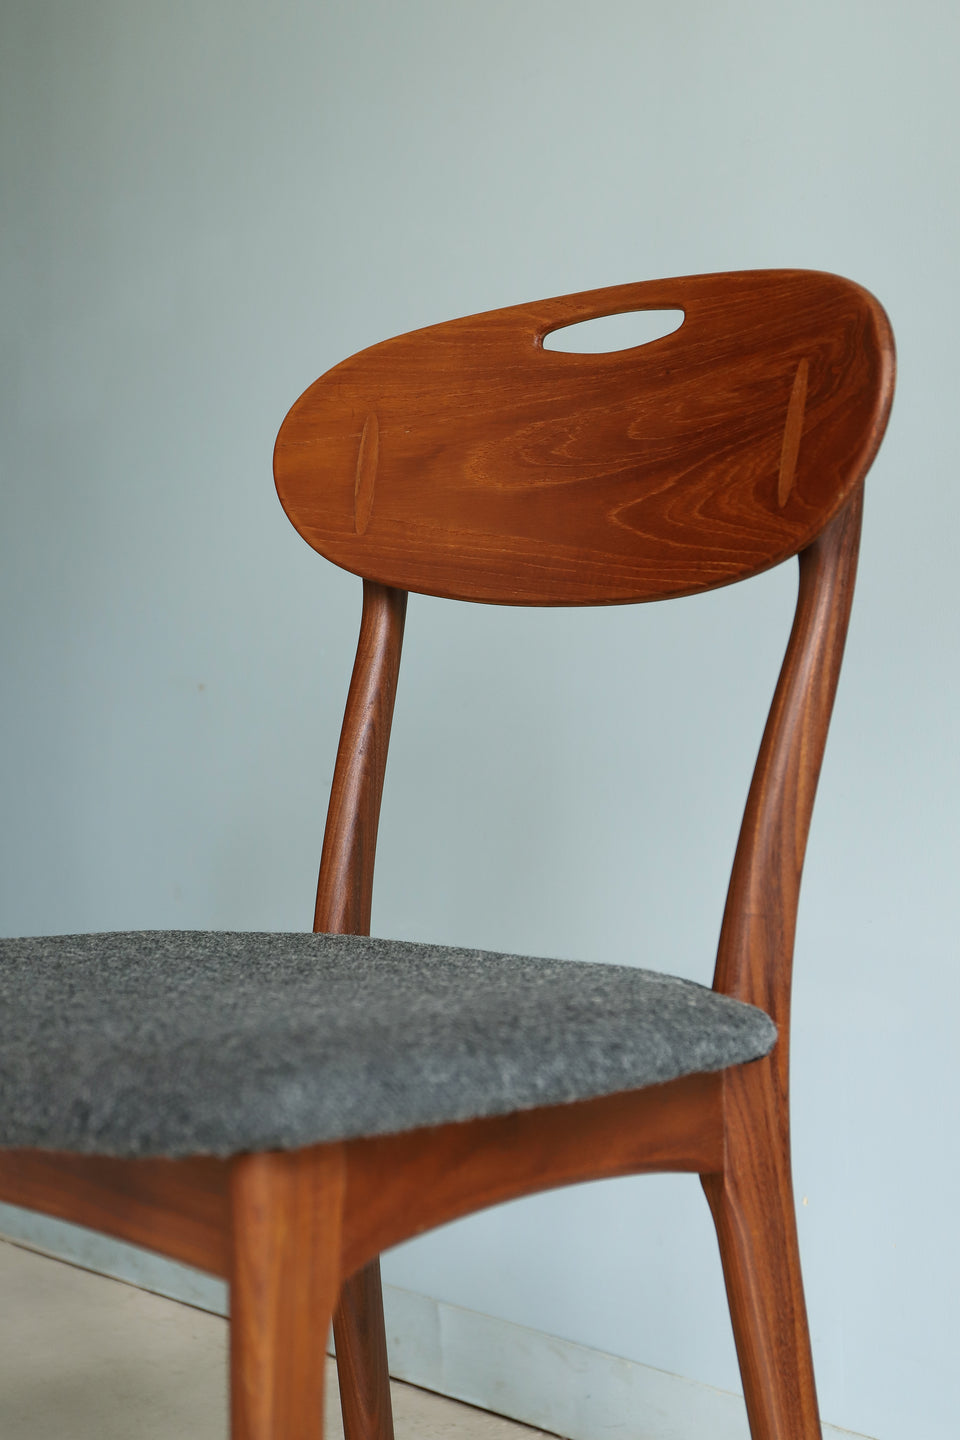 Danish Vintage Dining Chair Svend Aage Madsen K.Knudsen & Son/デンマークヴィンテージ ダイニングチェア スヴェン・アー・マドセン 椅子 北欧家具